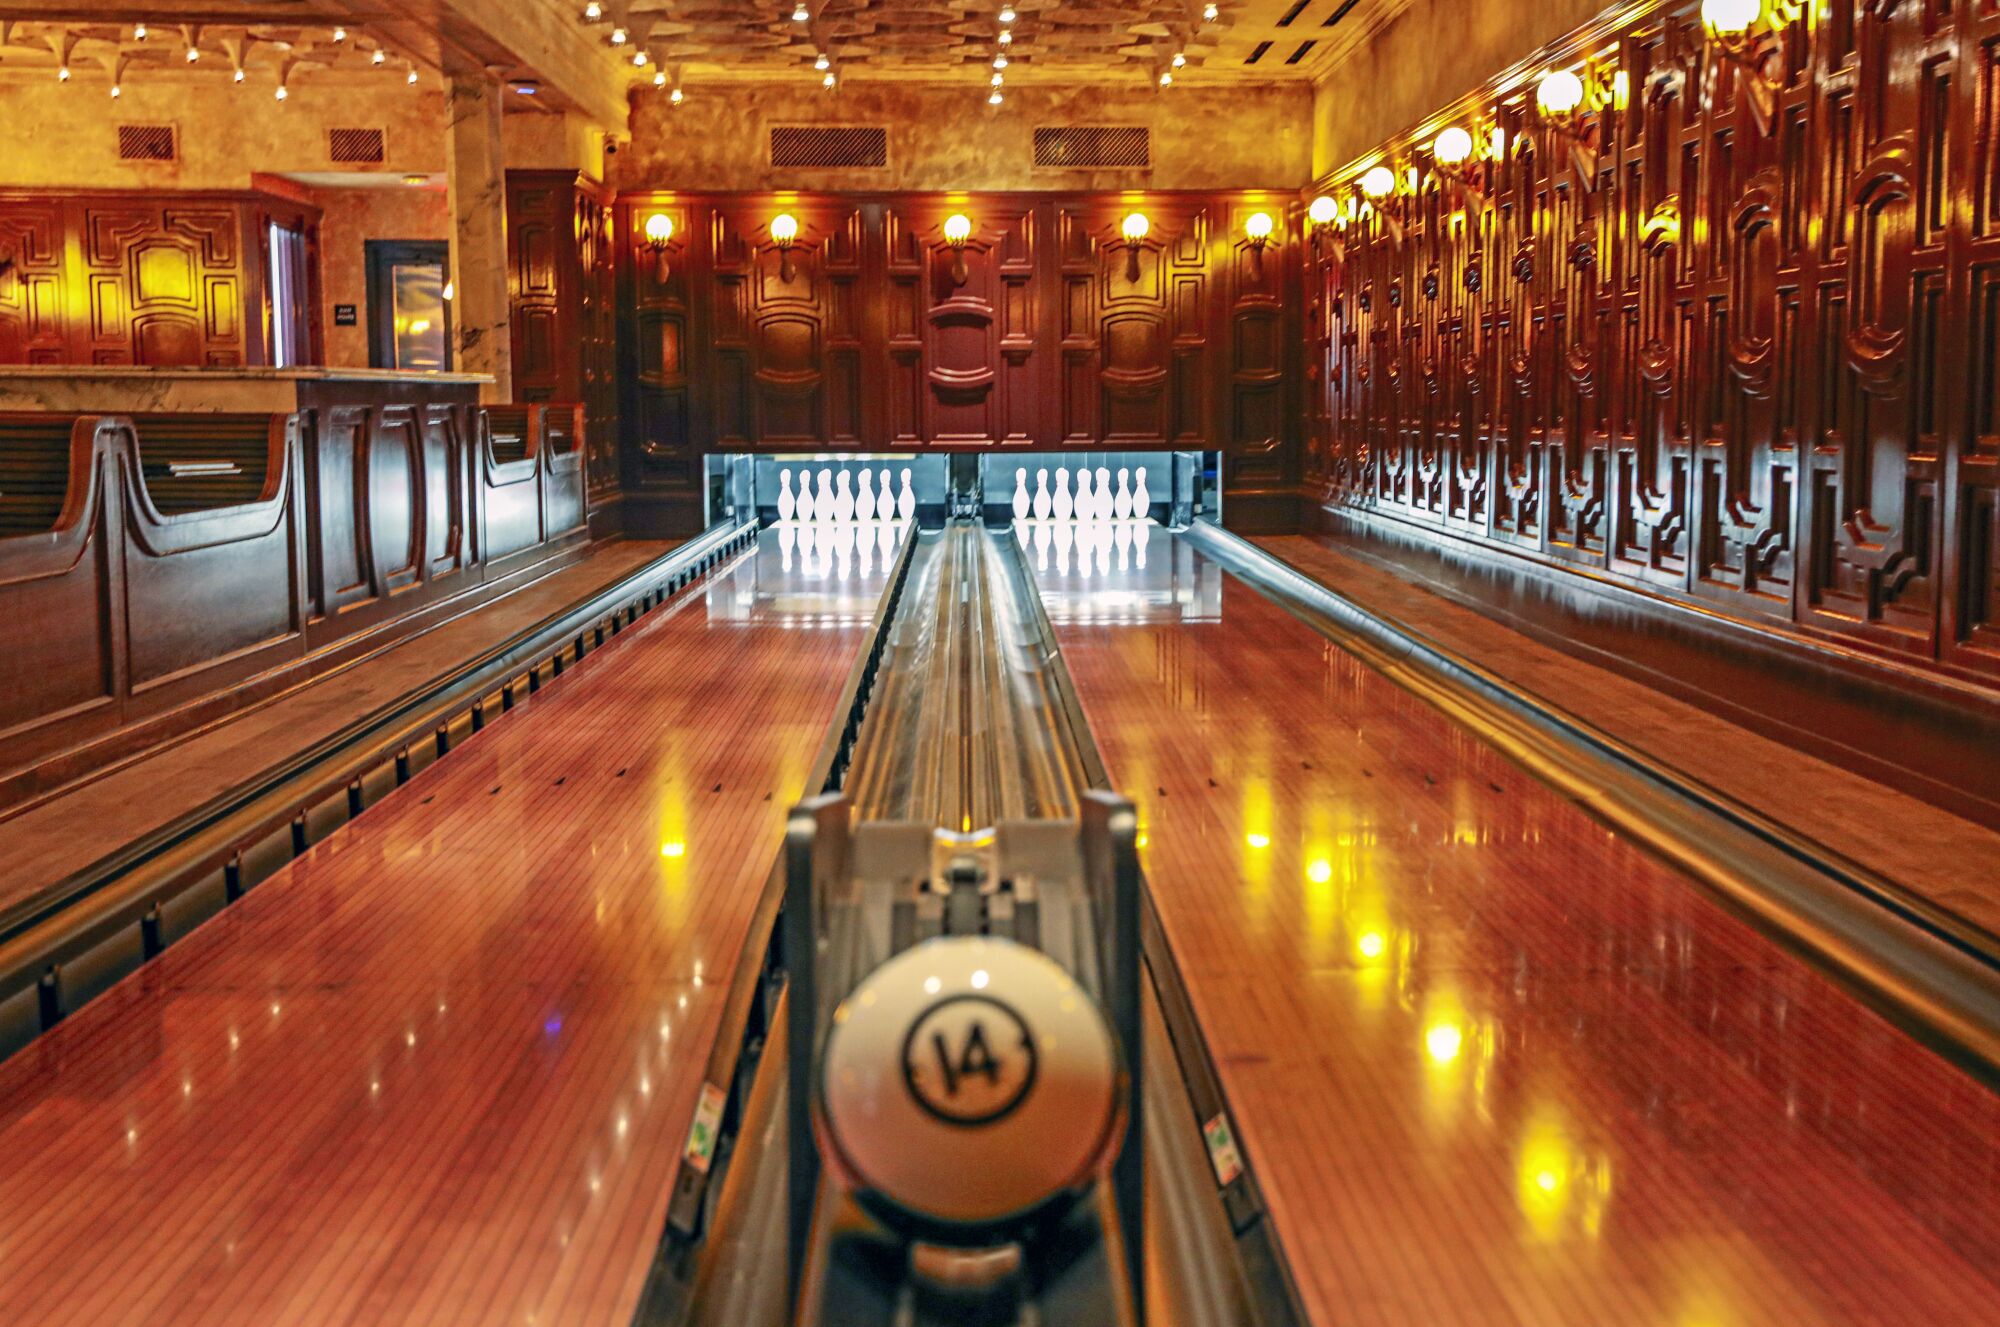 The Gutter bar and game room features a bowling alley.